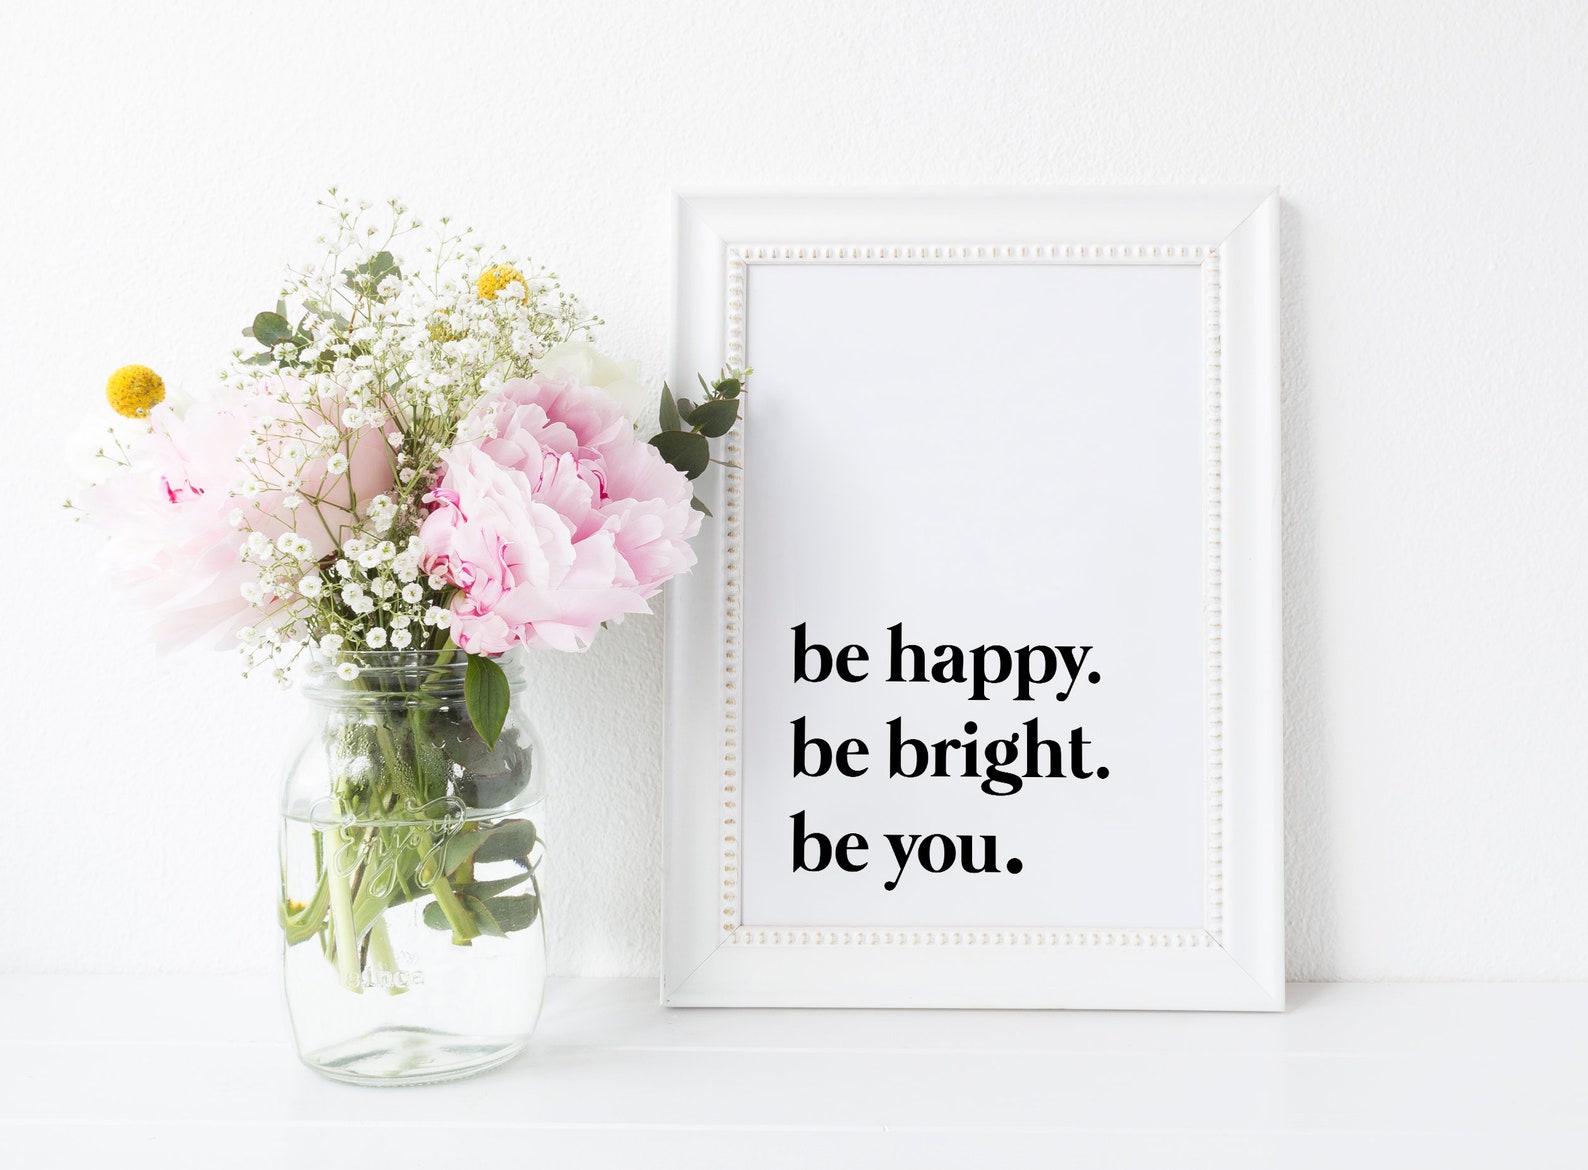 Life is bright. Be Happy be Bright be you.